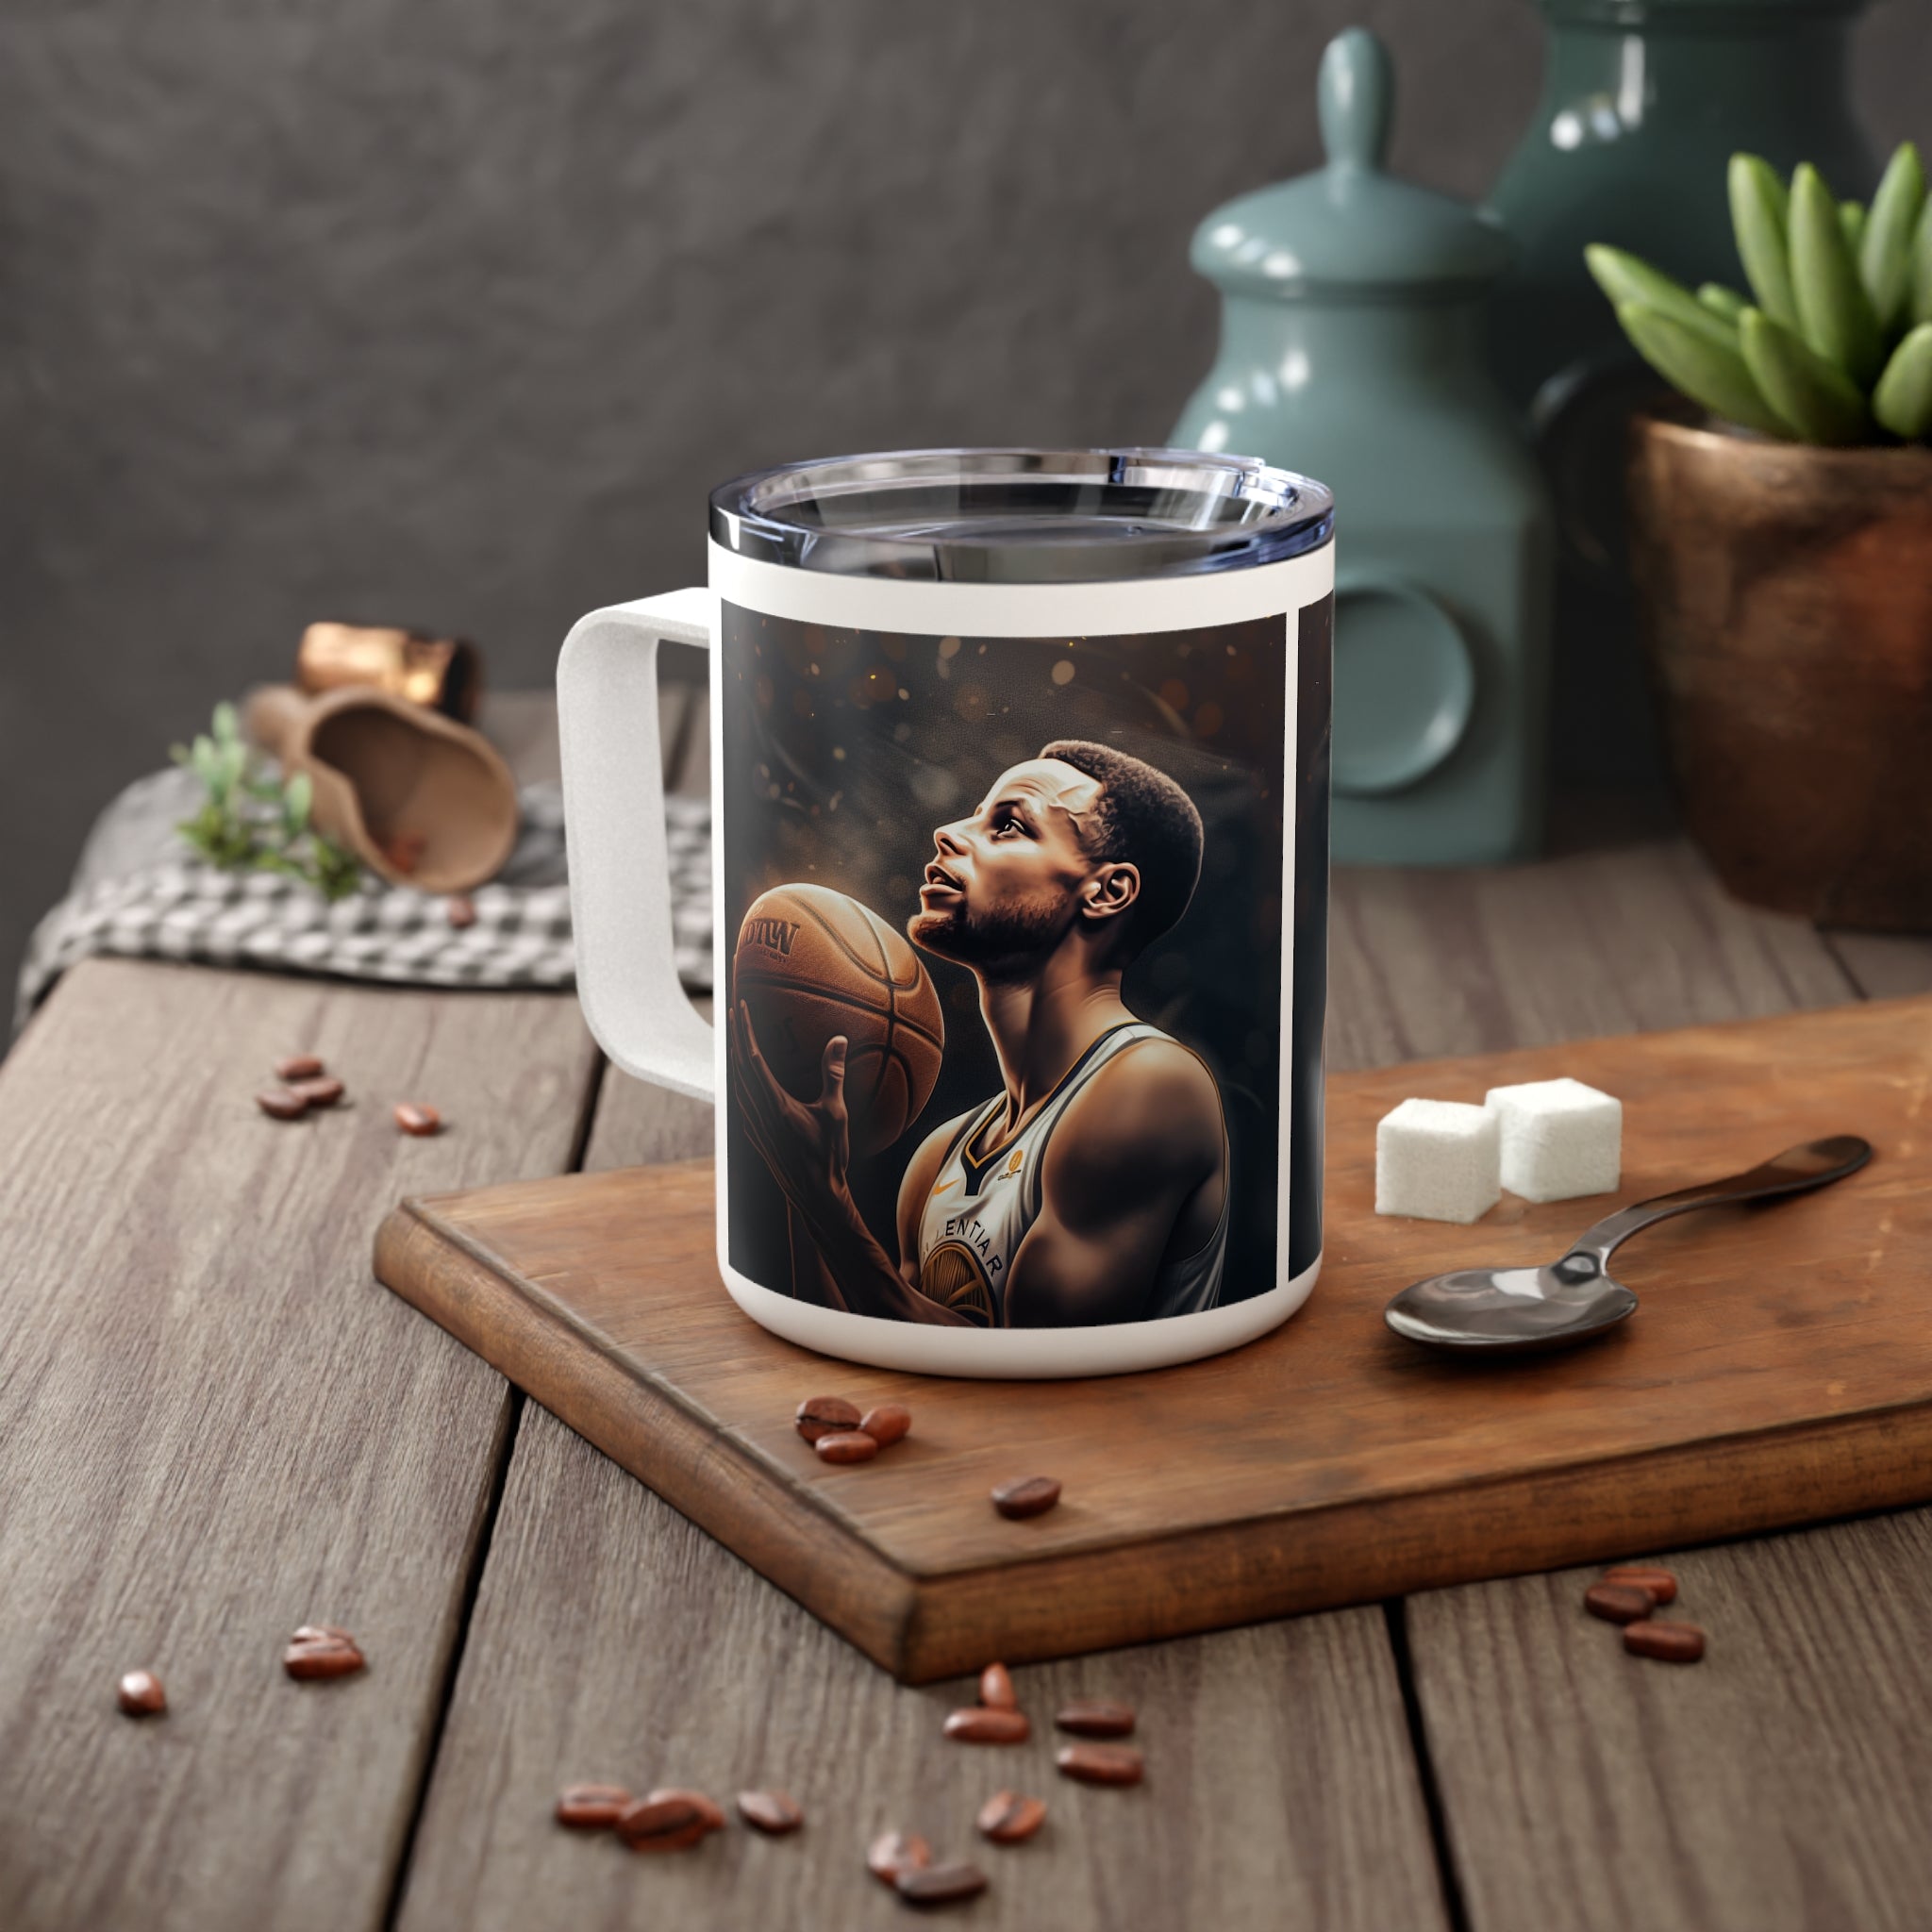 Great Conversation Starter at Office Gatherings or Group Meetings! Professional Basketball Player Insulated Coffee Mug, 10oz - For True Basketball Heroes!